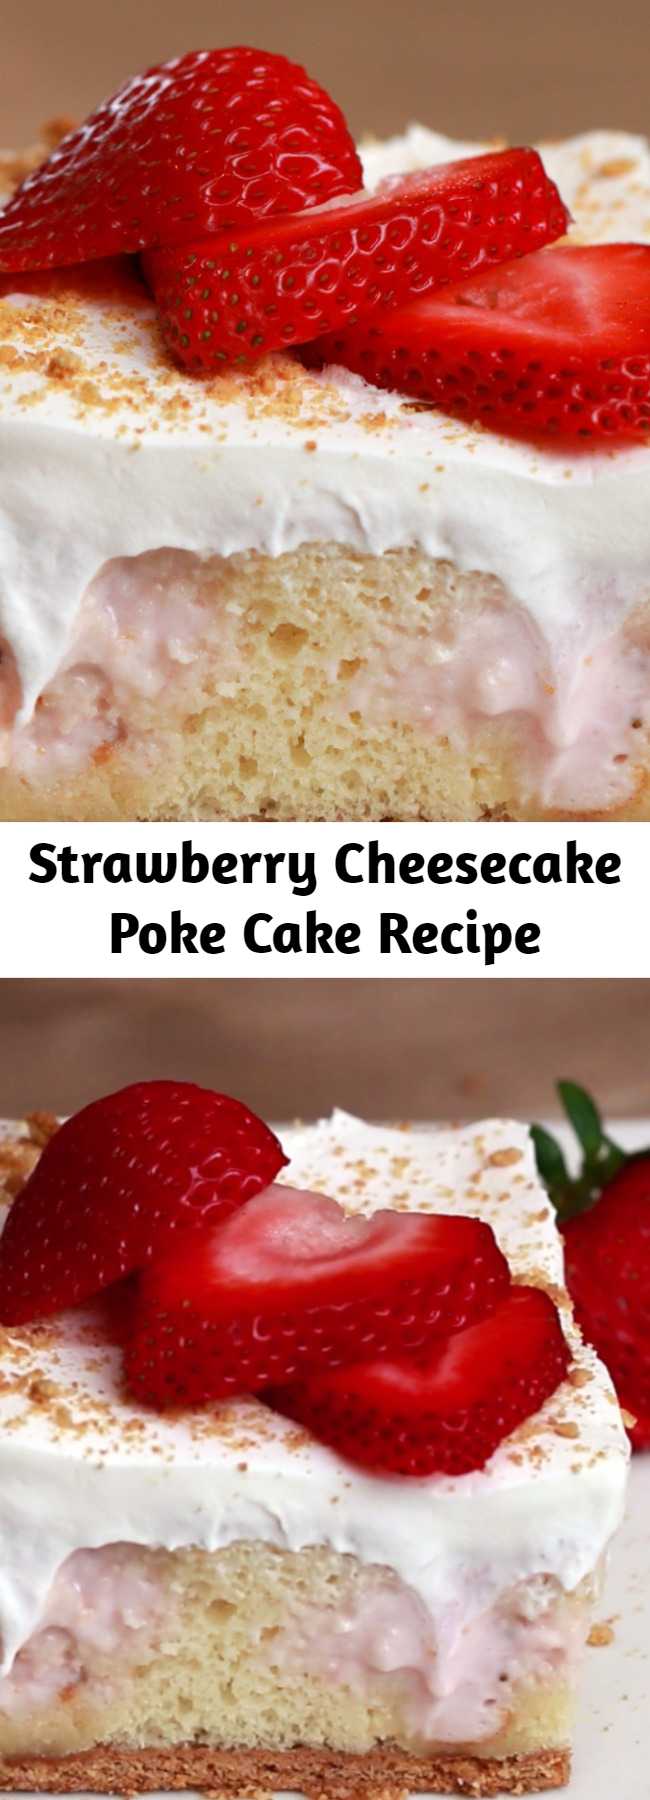 Strawberry Cheesecake Poke Cake Recipe - If you’re stuck in a dessert rut, poke cake is just the recipe you need to try. It’s low-maintenance to bake, and it’s always a crowd pleaser. Poke holes using the back of a wooden spoon into a simple vanilla cake base, then cover the cake with a mixture of strawberries, cream cheese, and condensed milk. Once the cake is done chilling, it’ll be filled with pockets of sweet berry deliciousness.